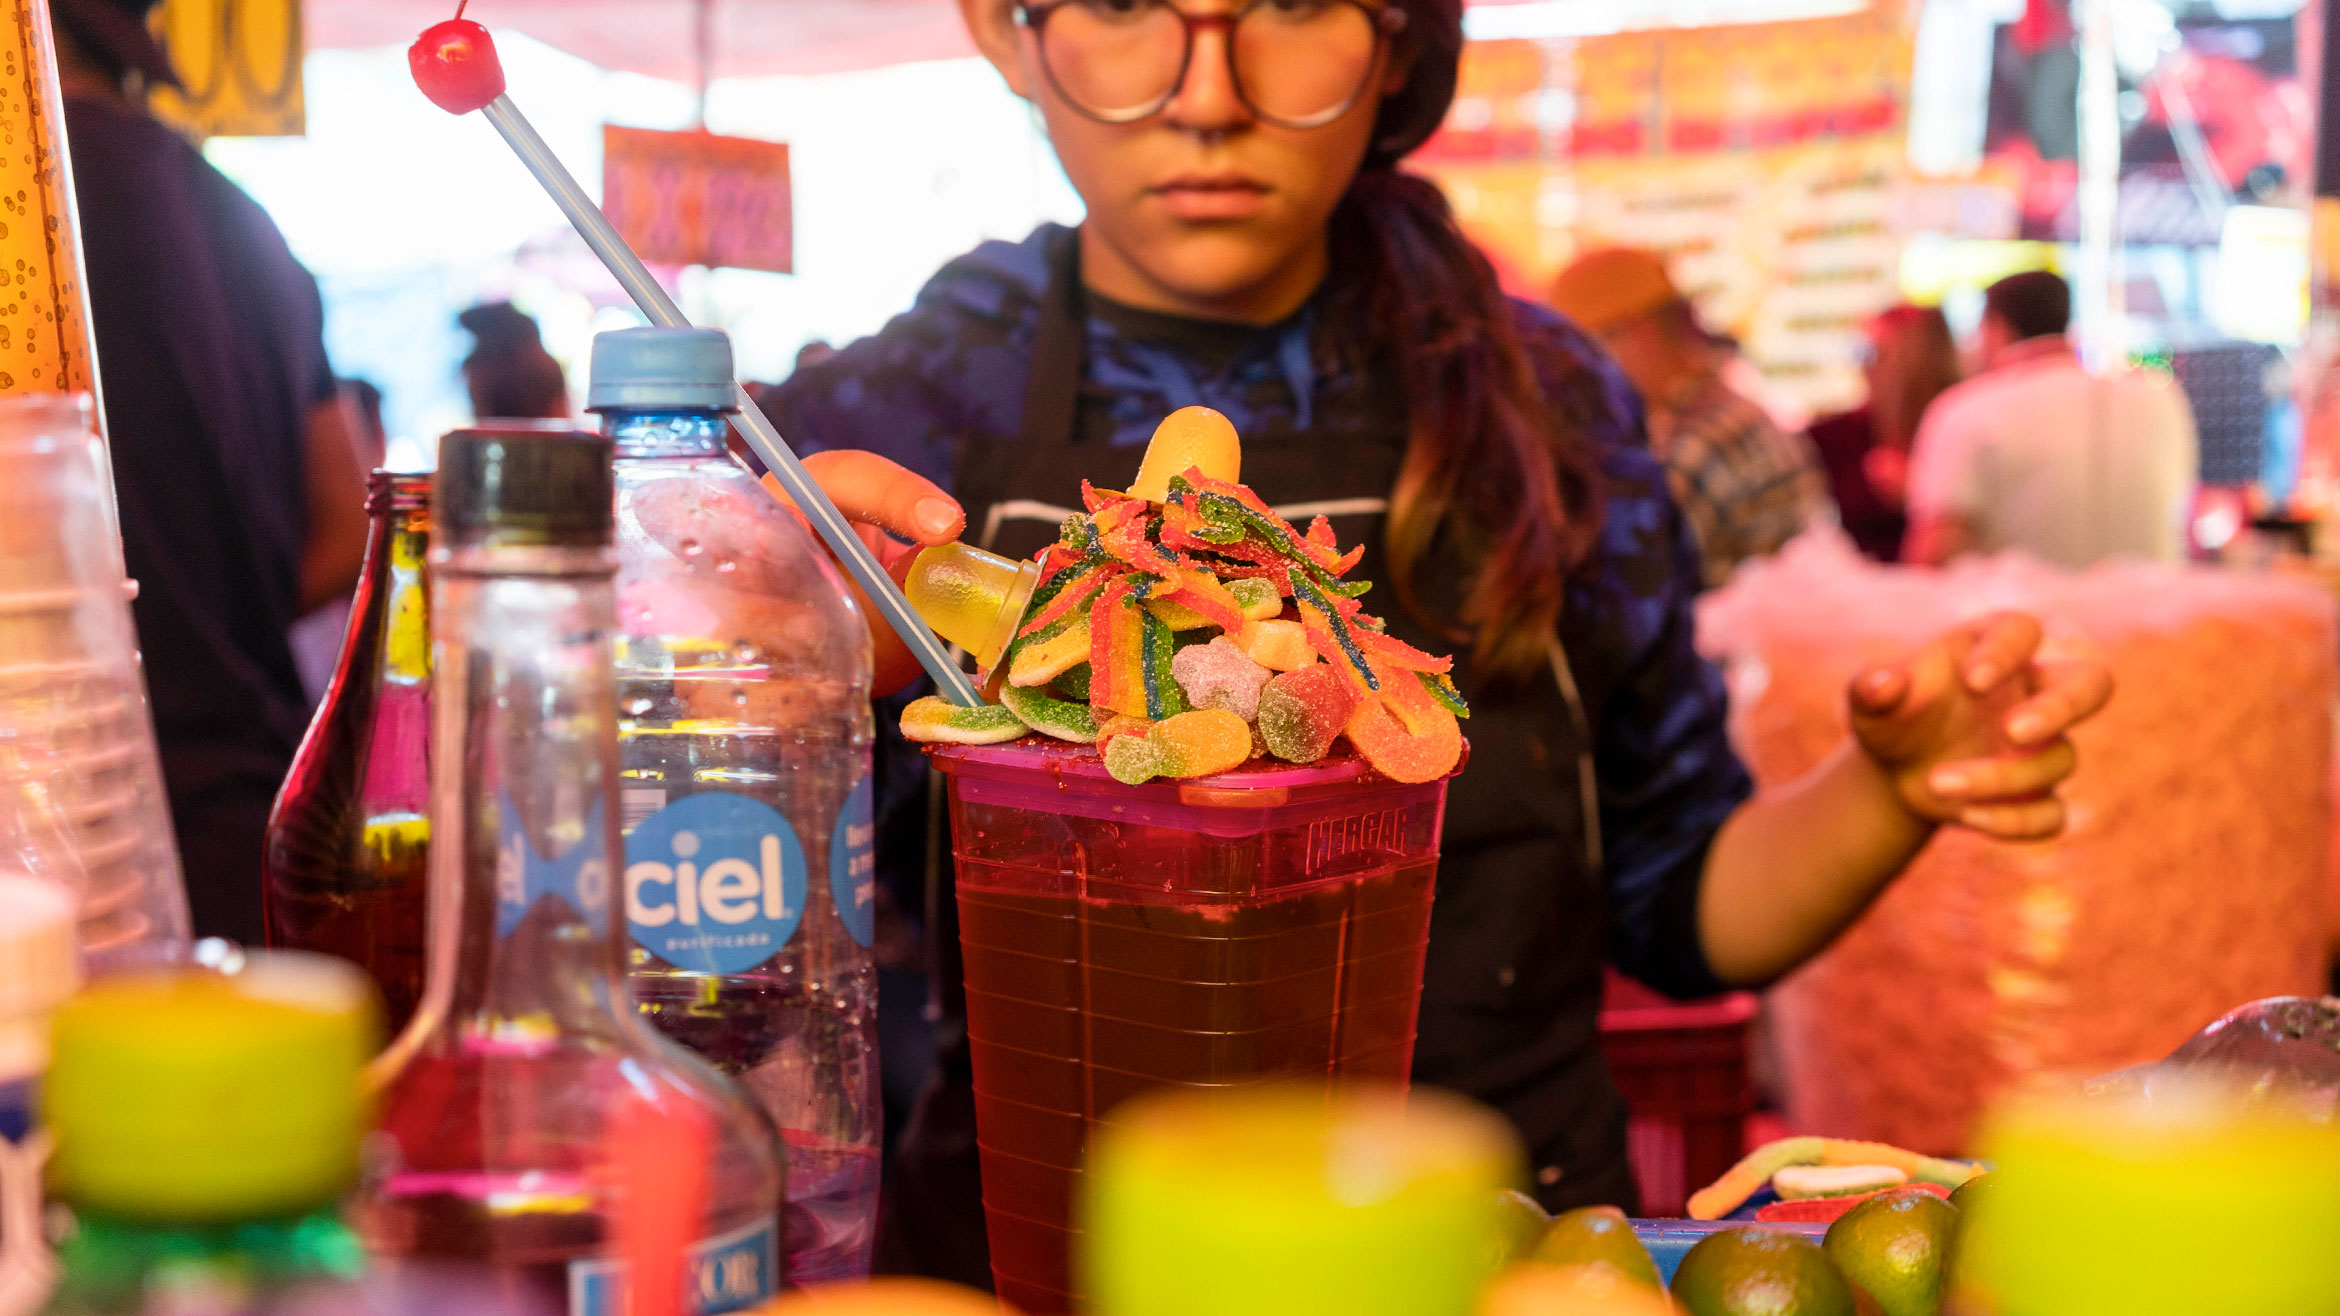 A woman stands behind a pitcher piled with gummy candies